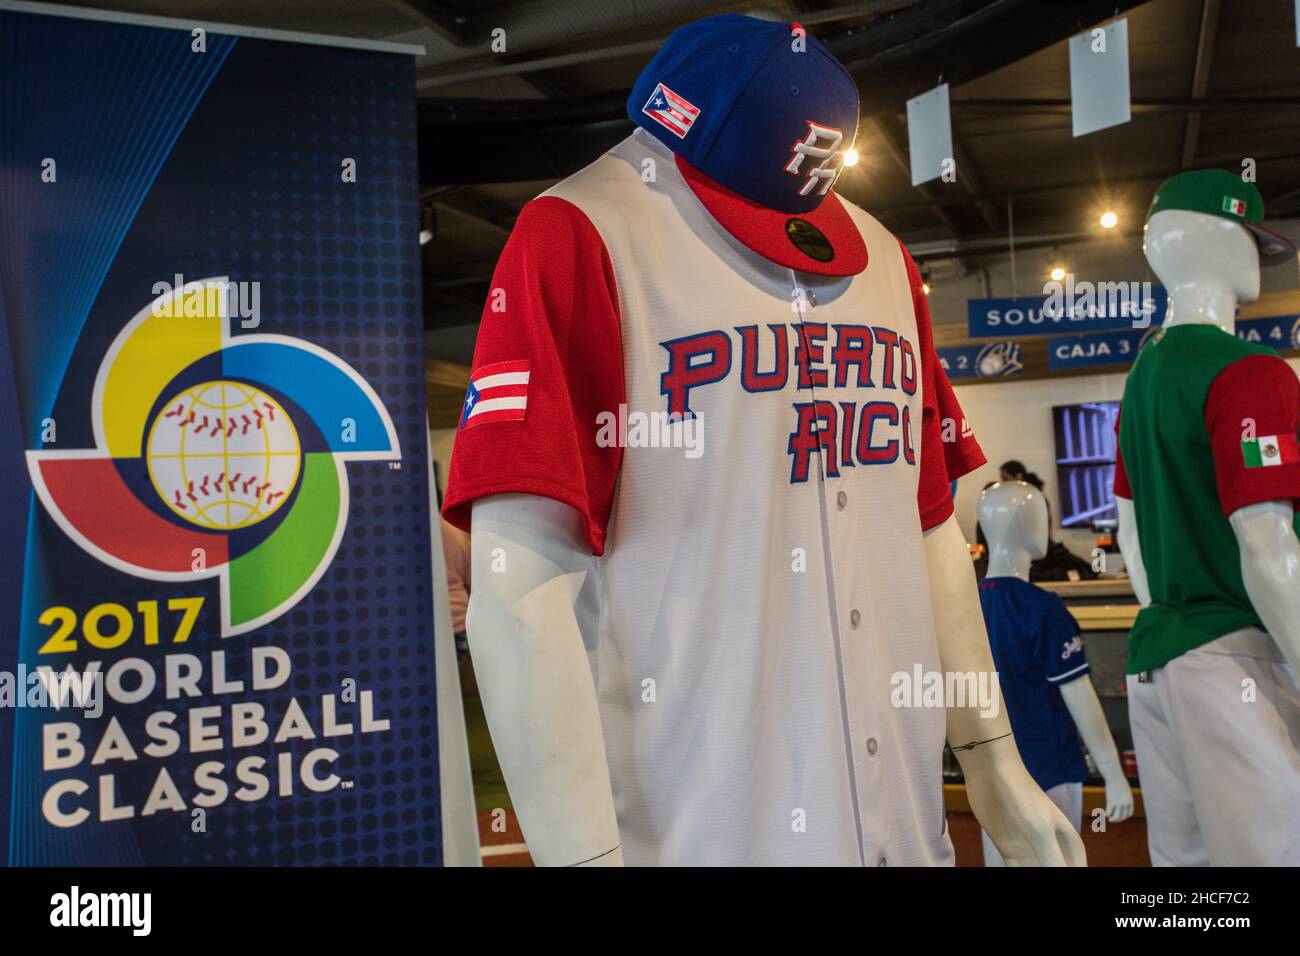 Cap and jersey from Italy and Puerto Rico, Venezuela and Mexico in Souvenir  official store caps from Mexico and jerseys for sale, boutique Aspects  prior to the World Baseball Classic to be